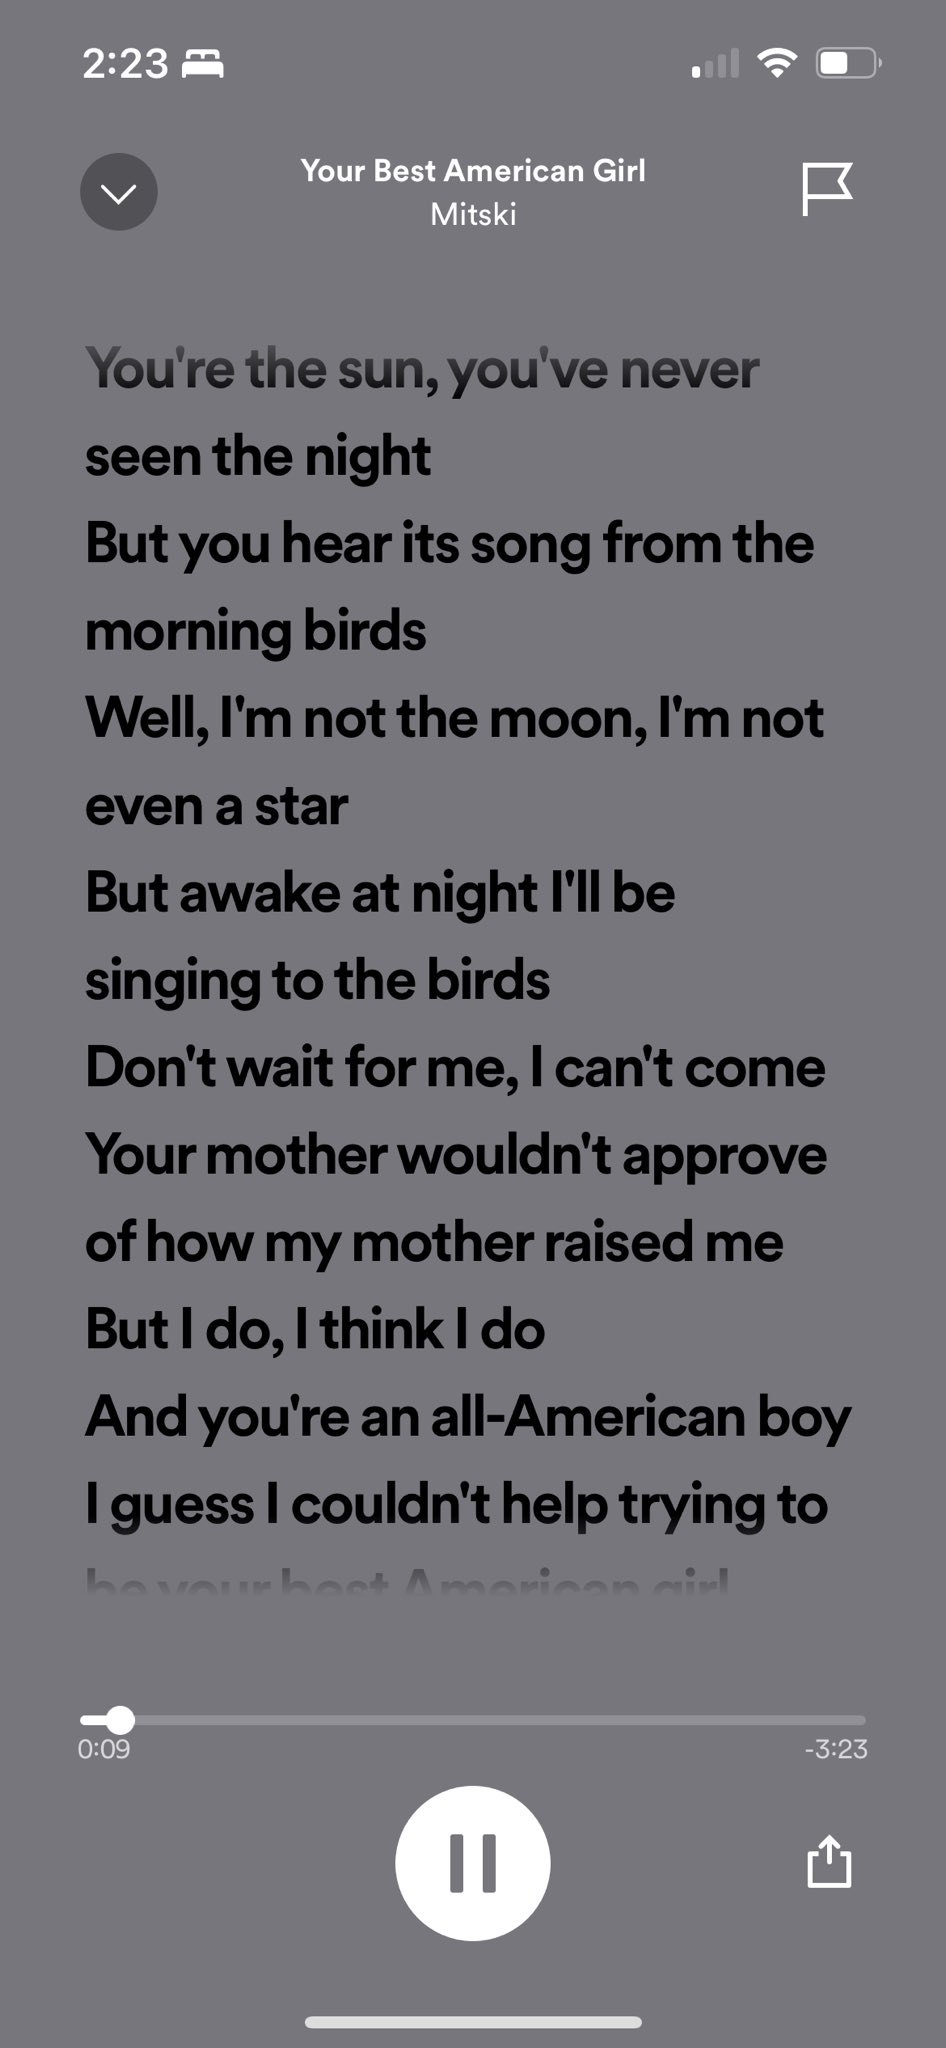 Your Best American Girl by Mitski Vintage Song Lyrics on Parchment